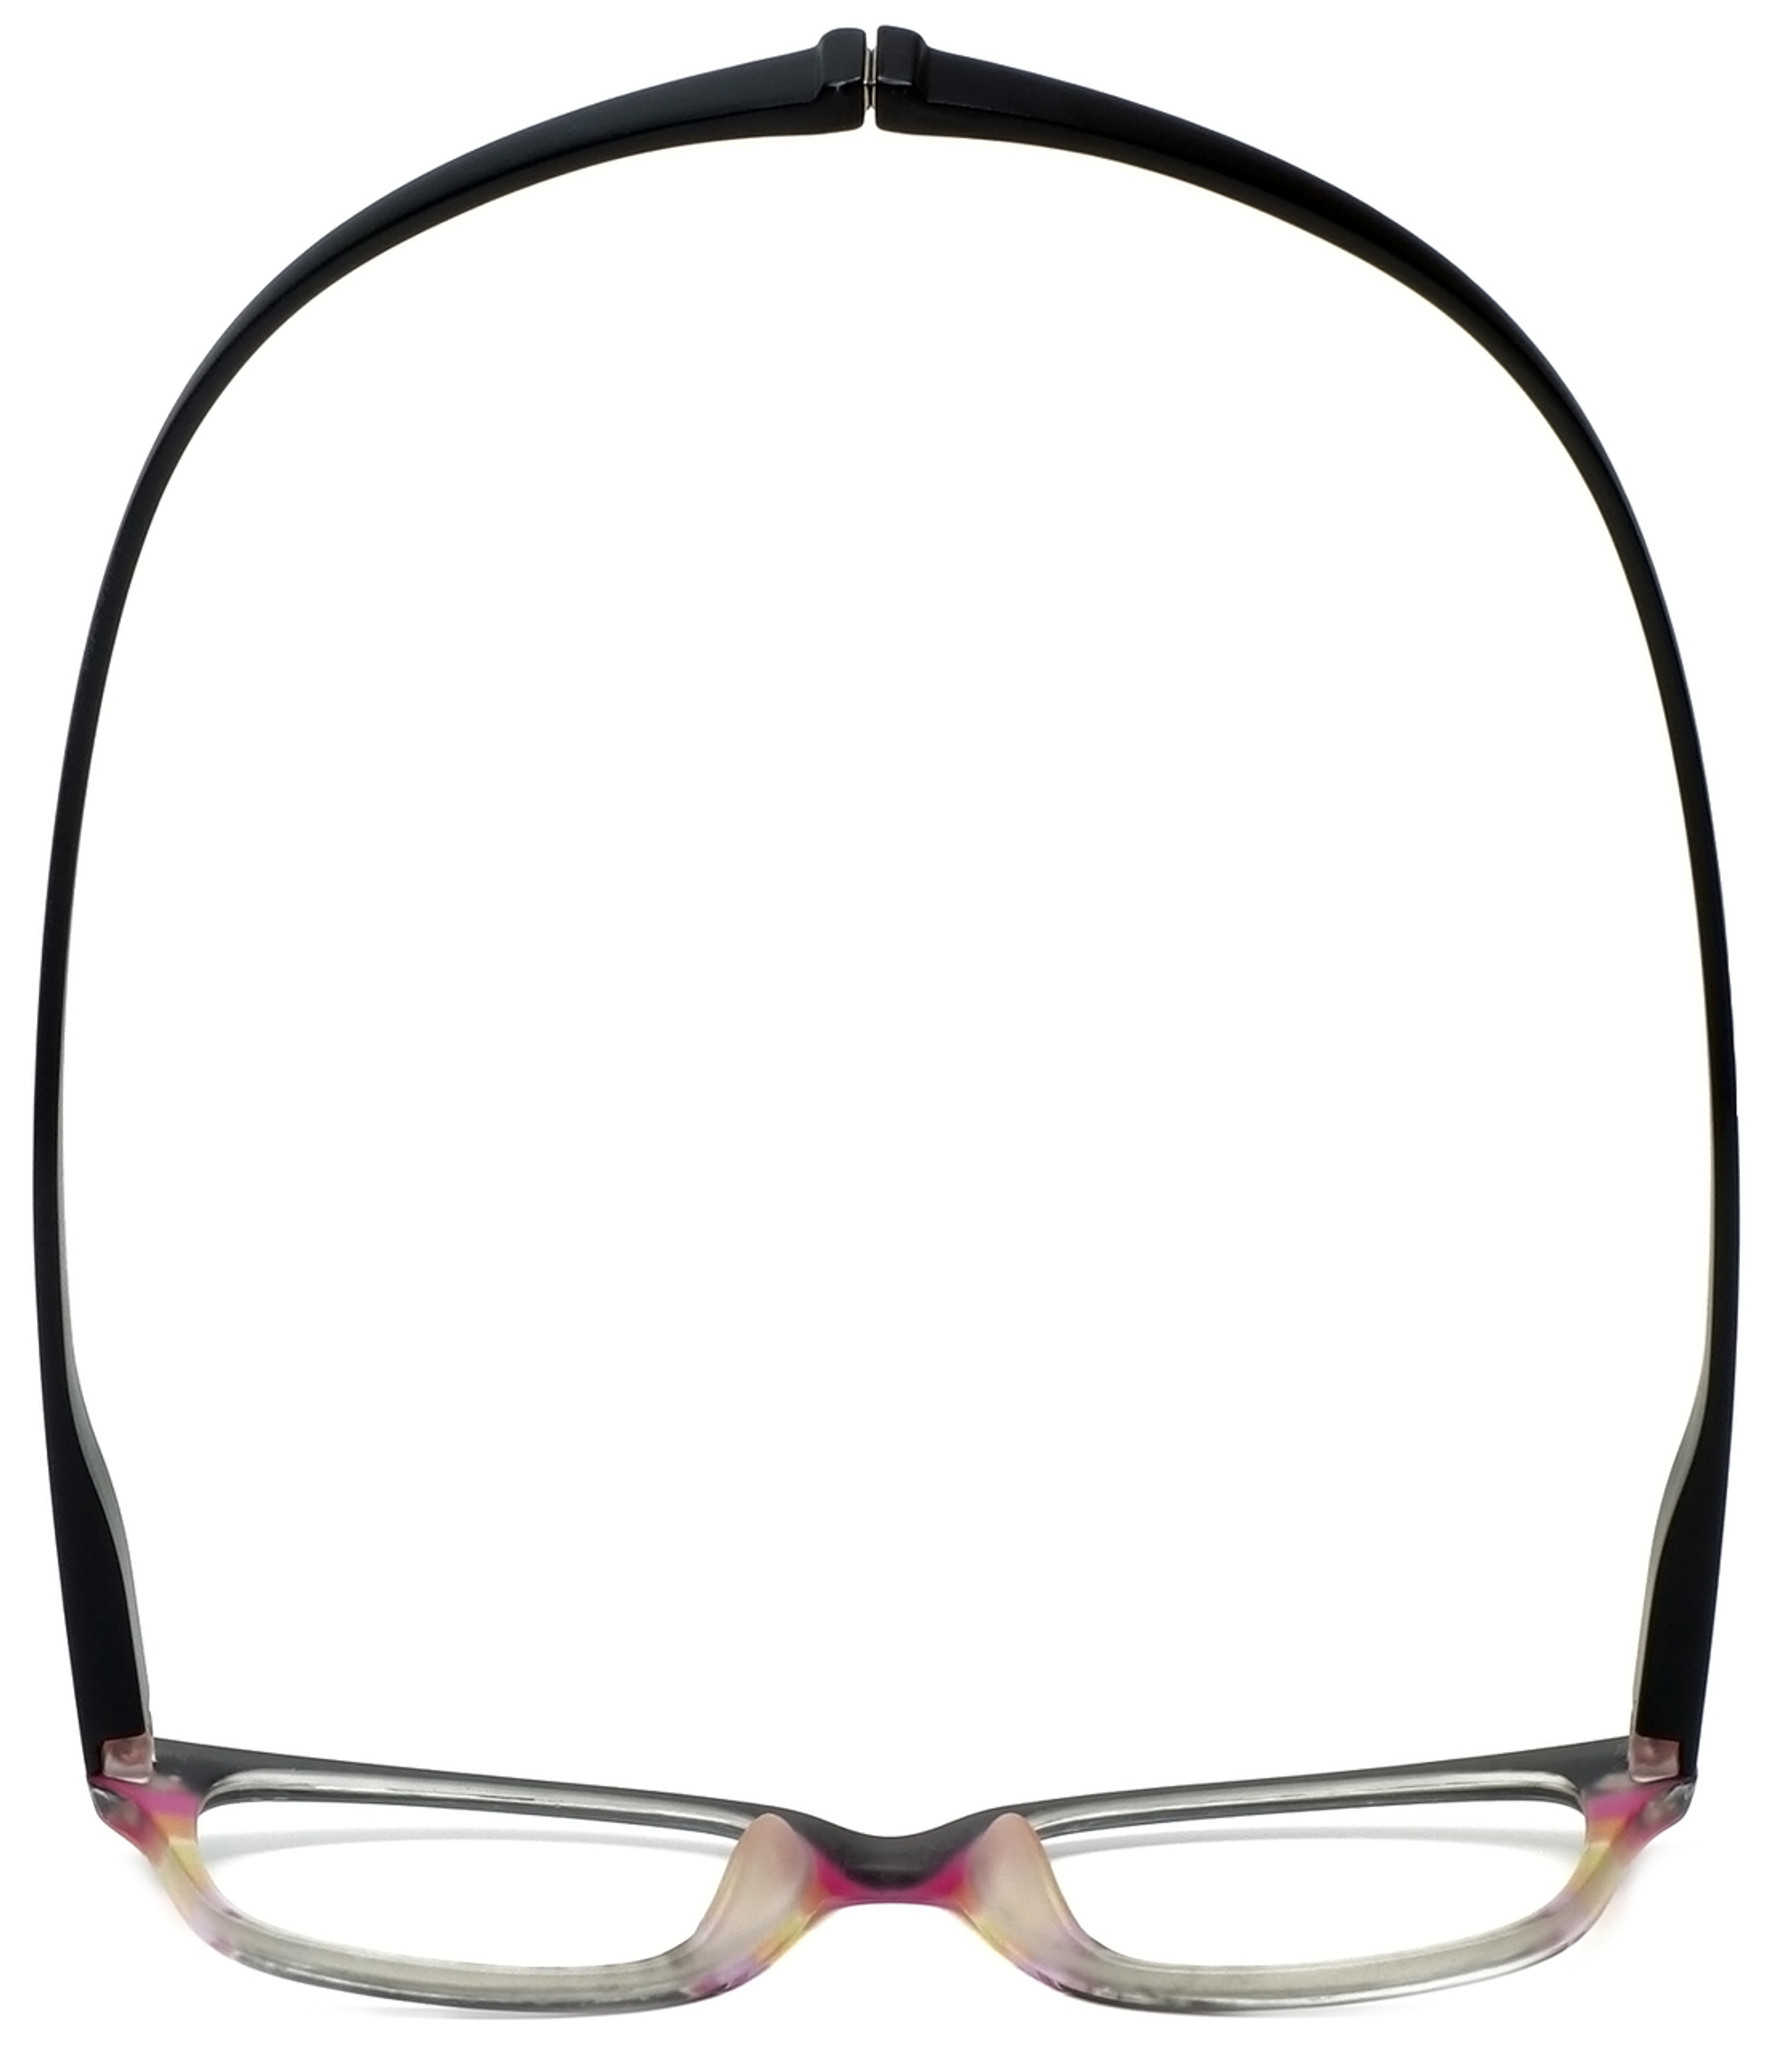 Magz Greenwich Blue Light Blocking Reading Glasses w/Magnetic Snap It Design - Magz